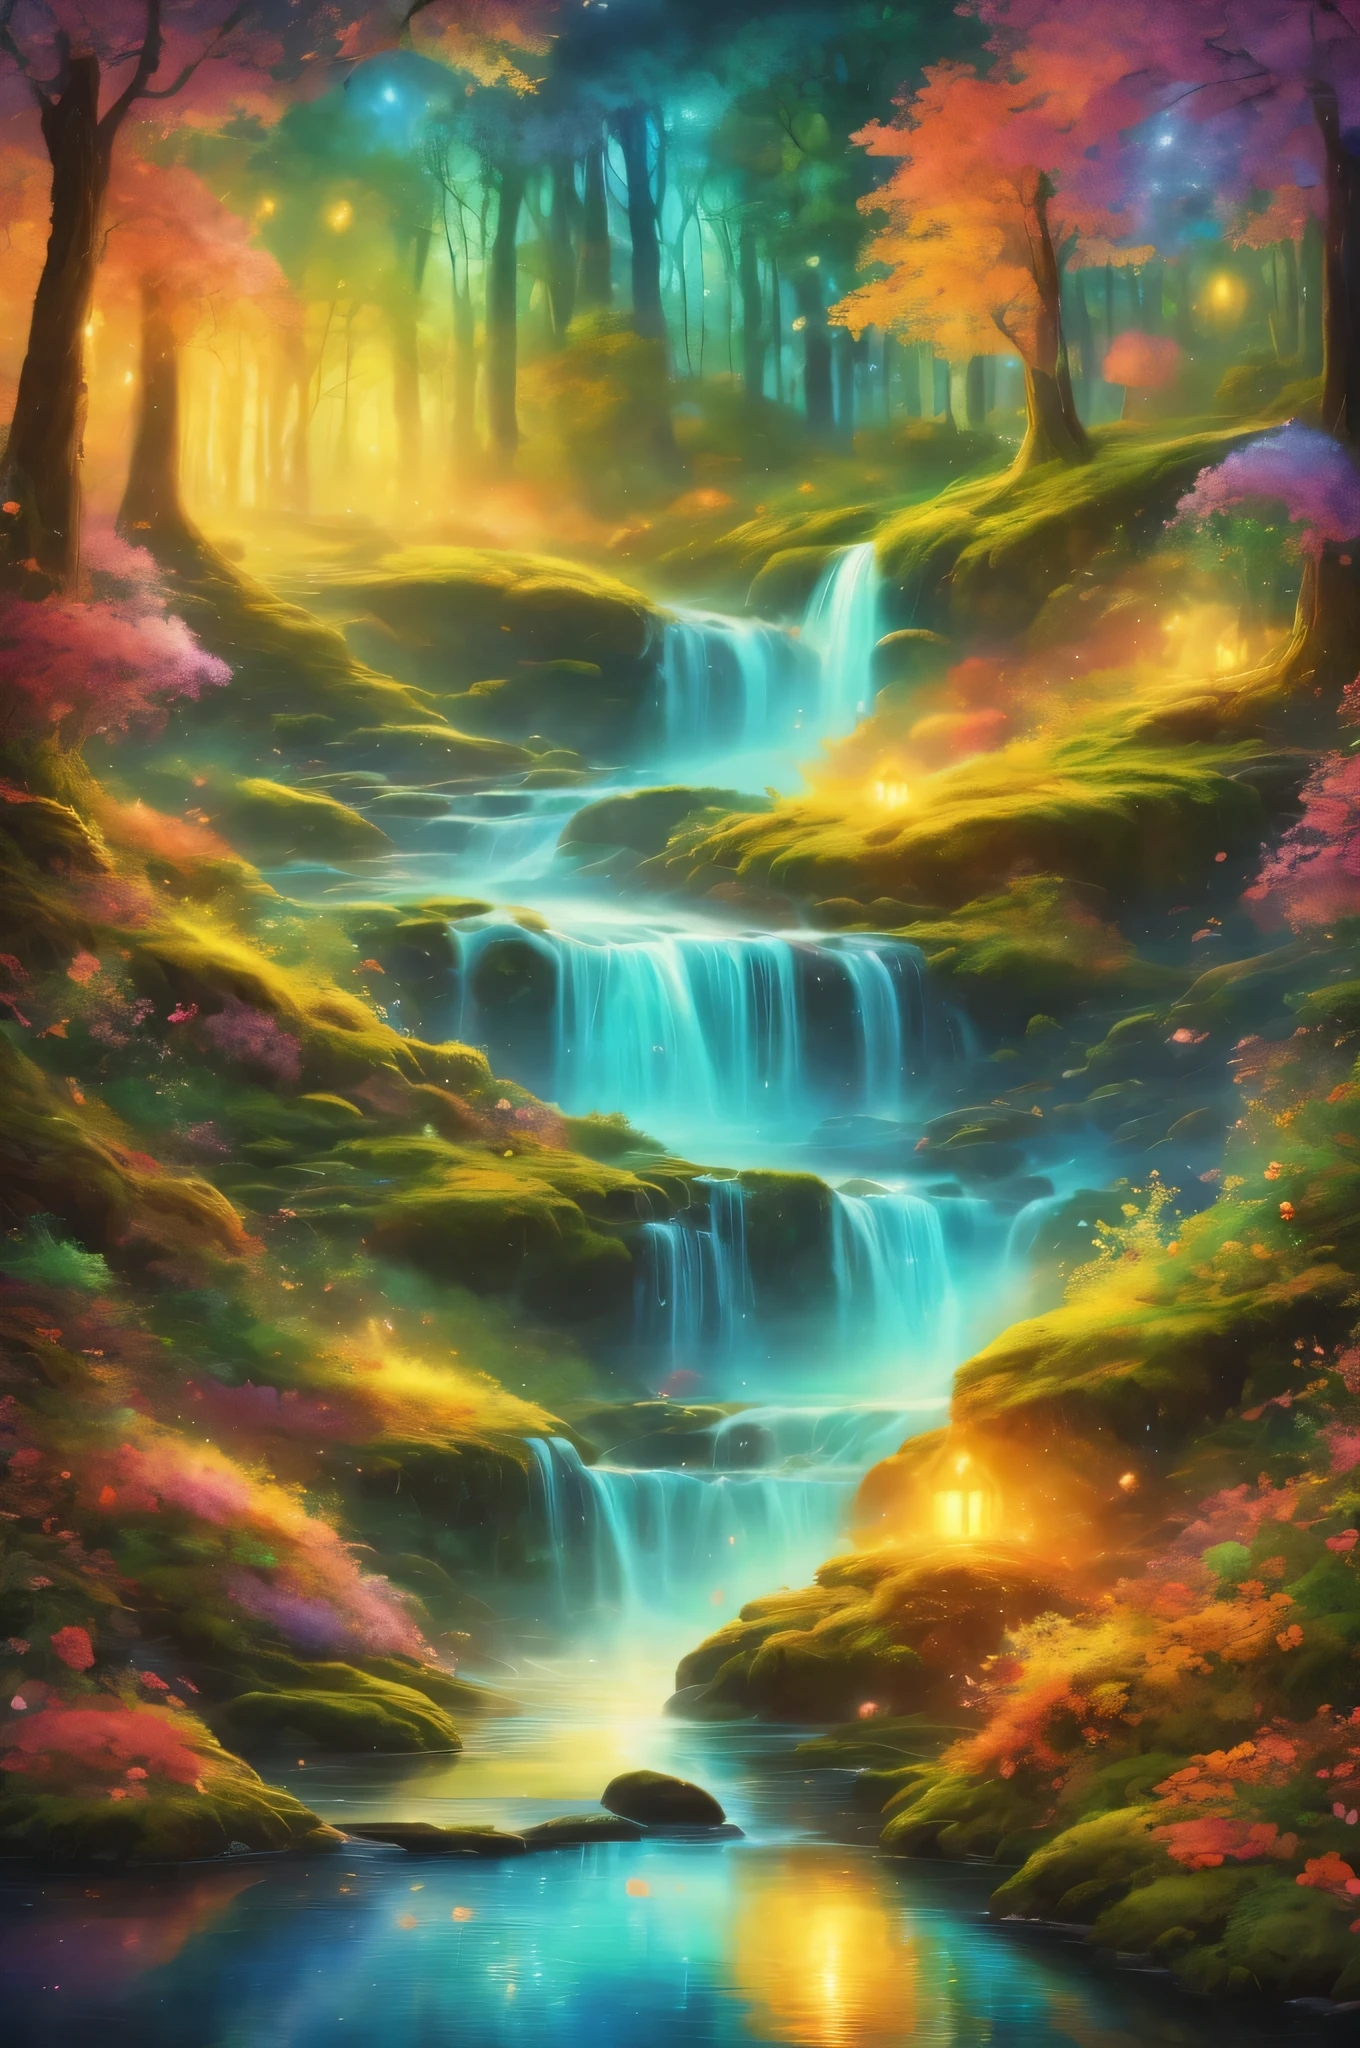 digital art,forest,Landscape painting,painting,forestの奥深く,深い緑のforest,beautifulforest,weak light,Tyndall effect,masterpiece,Oil paints,intricate details,T-Masterpiece,Inspiration,beautiful,rendering,masterpiece,最高masterpiece,Art work using light,Artistic,get used to it,Microparticles,flame,stream,Morning haze,early morning,,Gradation,masterpiece,最高masterpiece,highest quality,rendering,rich colors,colorfulな呪文を唱える,dream-like,Detailed details,In detail,,bright colors,beautiful光と影,magic,dream-like,Inspiration,beautiful,rendering,colorful,wonderful,particles of light,それにget used to it,masterpiece,最高masterpiece,Art work using light,Artistic,それにget used to it,Tyndall effect